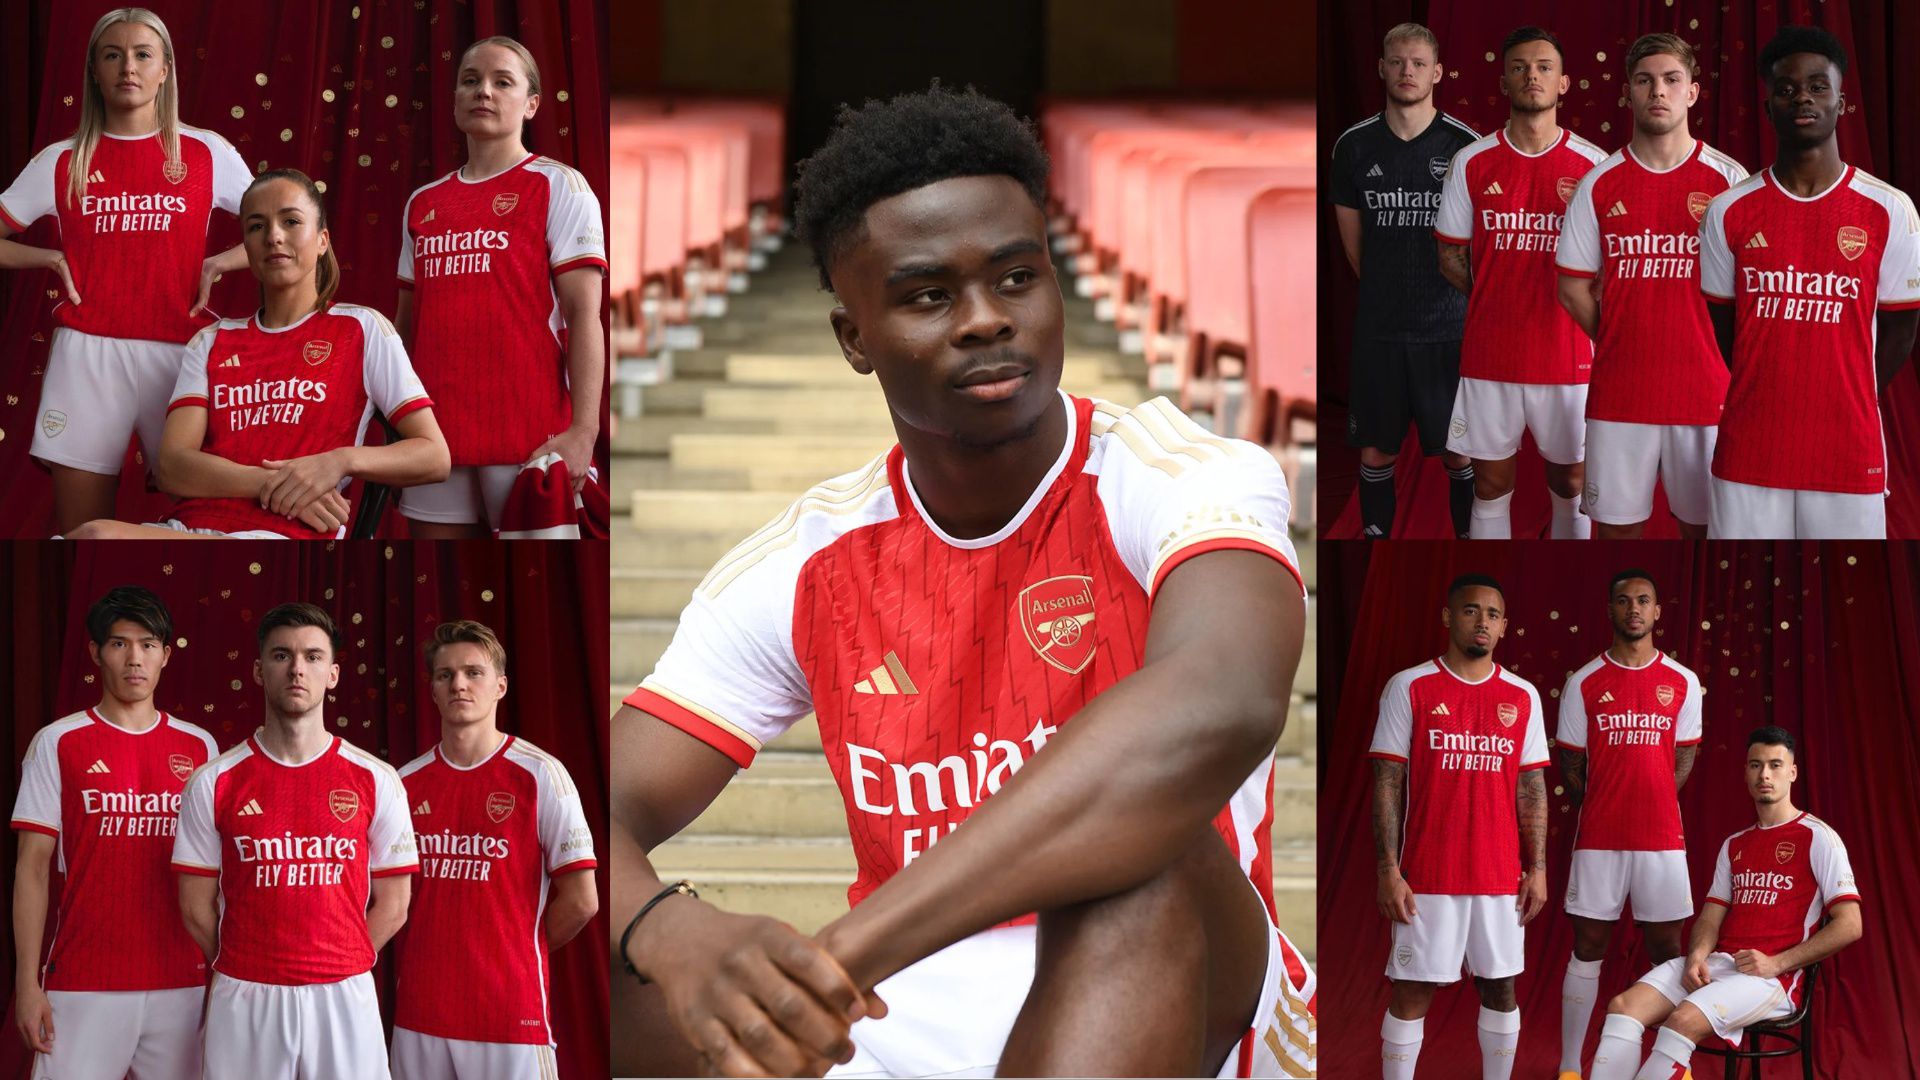 In the last Premier League encounter against Wolverhampton Wanderers at Emirates Stadium on Sunday, the Arsenal men's squad will also don the new kit.